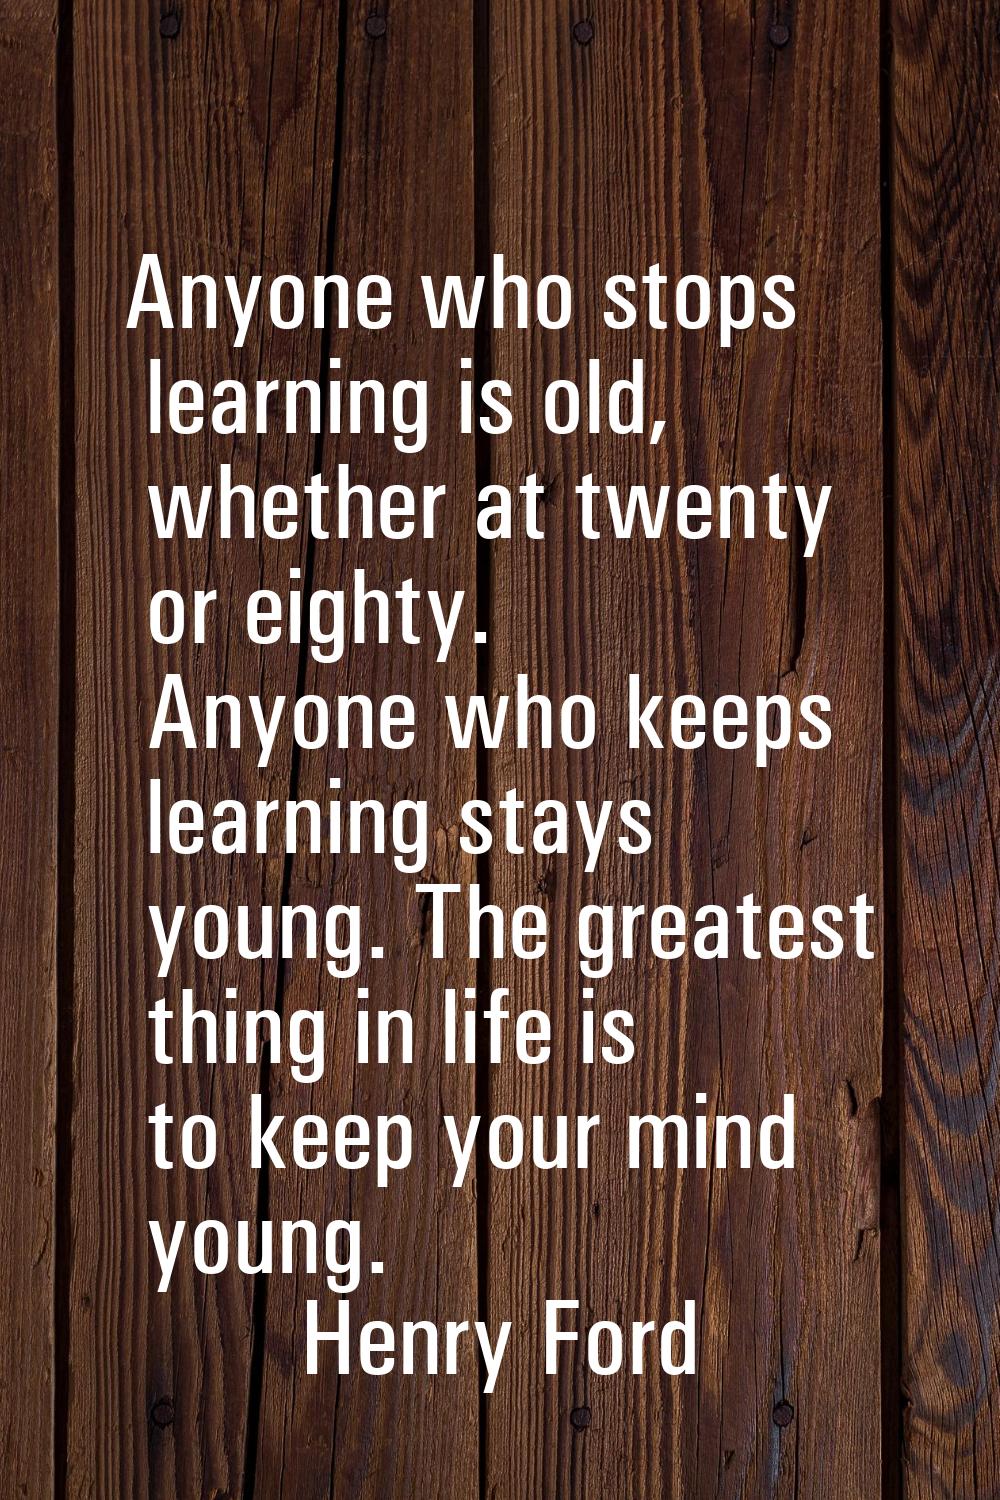 Anyone who stops learning is old, whether at twenty or eighty. Anyone who keeps learning stays youn